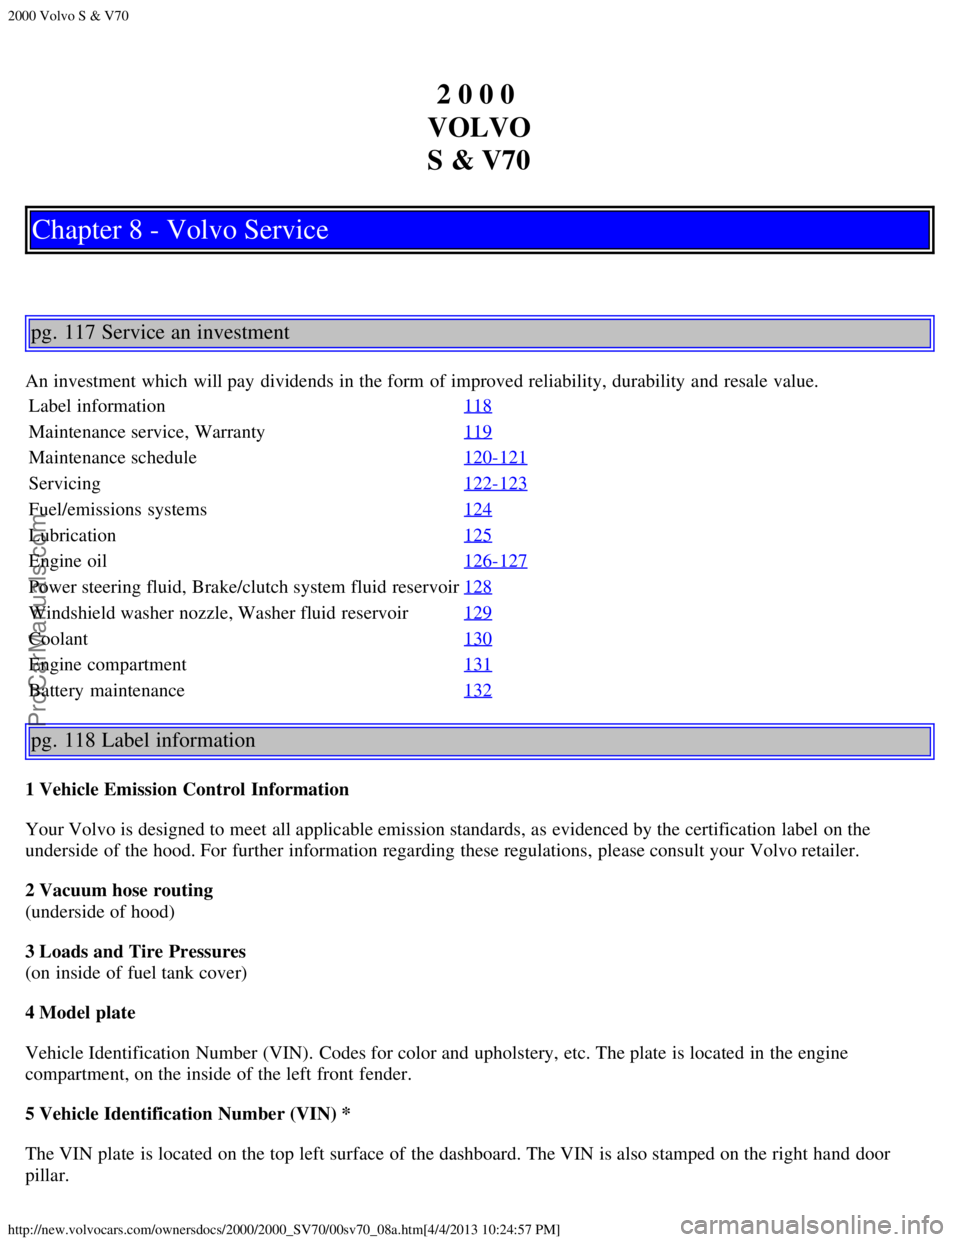 VOLVO V70 2000  Owners Manual 2000 Volvo S & V70
http://new.volvocars.com/ownersdocs/2000/2000_SV70/00sv70_08a.htm[4/4/2013 10:24:57 PM]
2 0 0 0 
VOLVO
S & V70
Chapter 8 - Volvo Service
pg. 117 Service an investment
An investment 